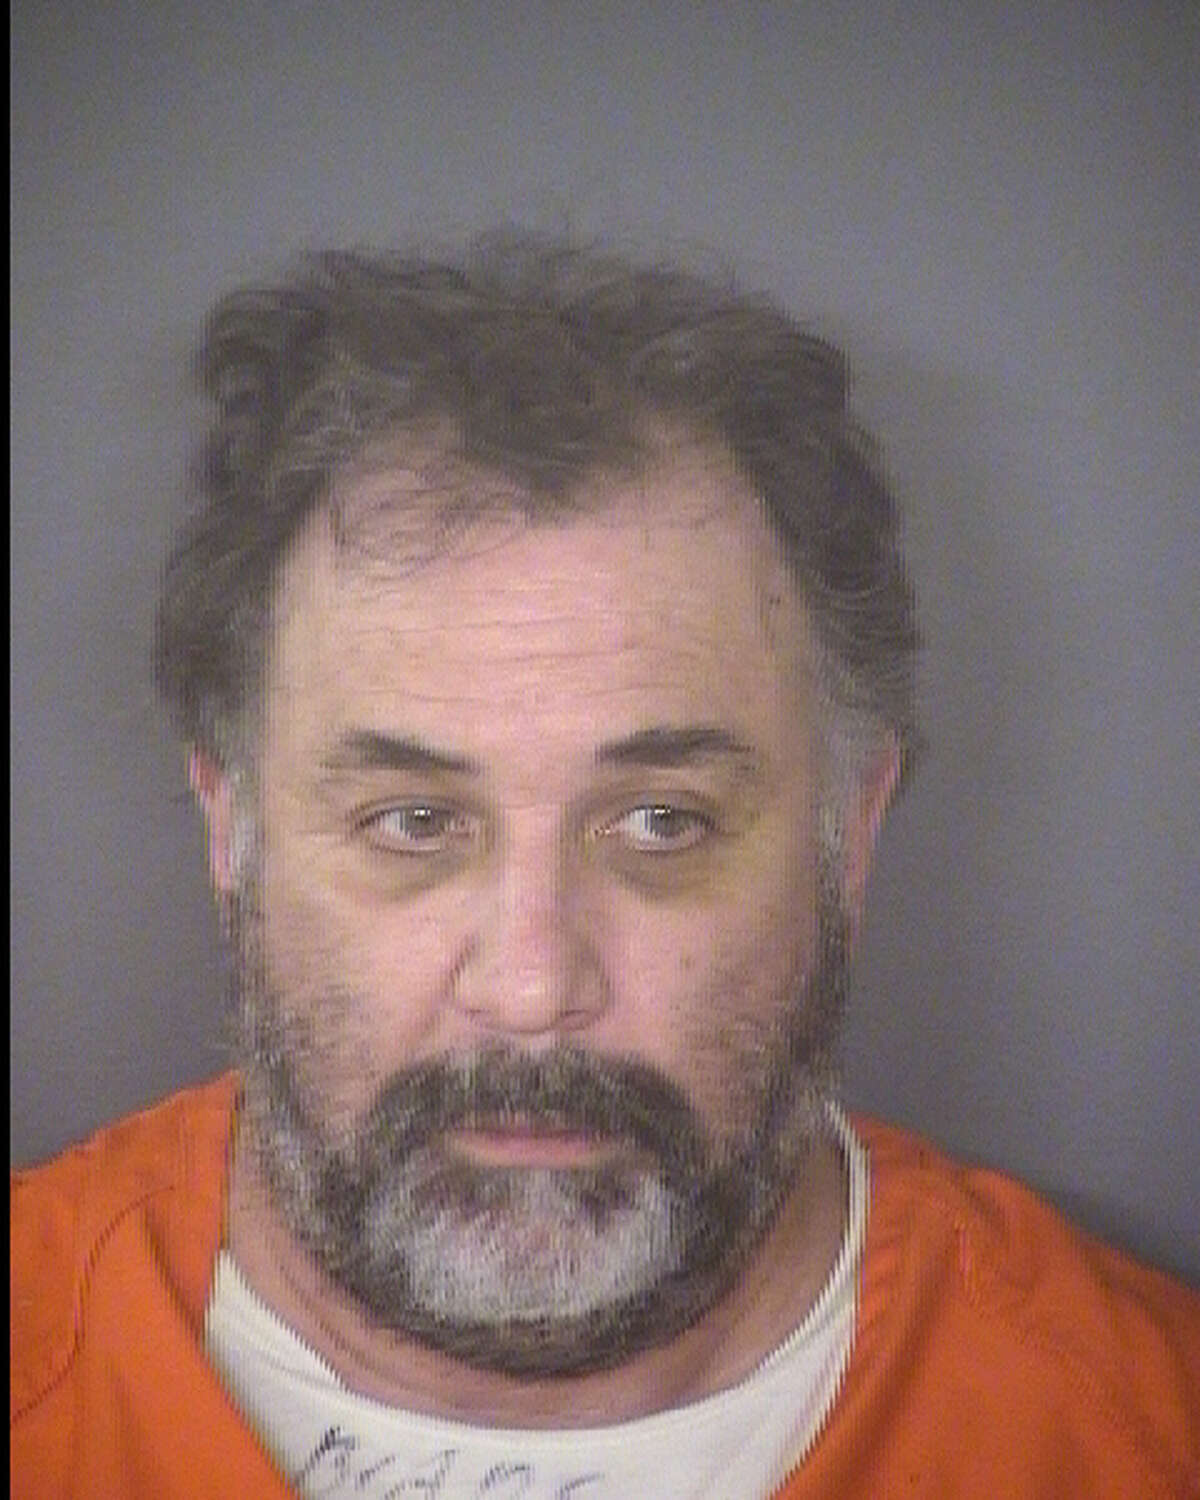 David Wayne Loven, 58, is accused of sexually assaulting a 5-year-old girl whom he also allegedly took inappropriate pictures of, officials said.